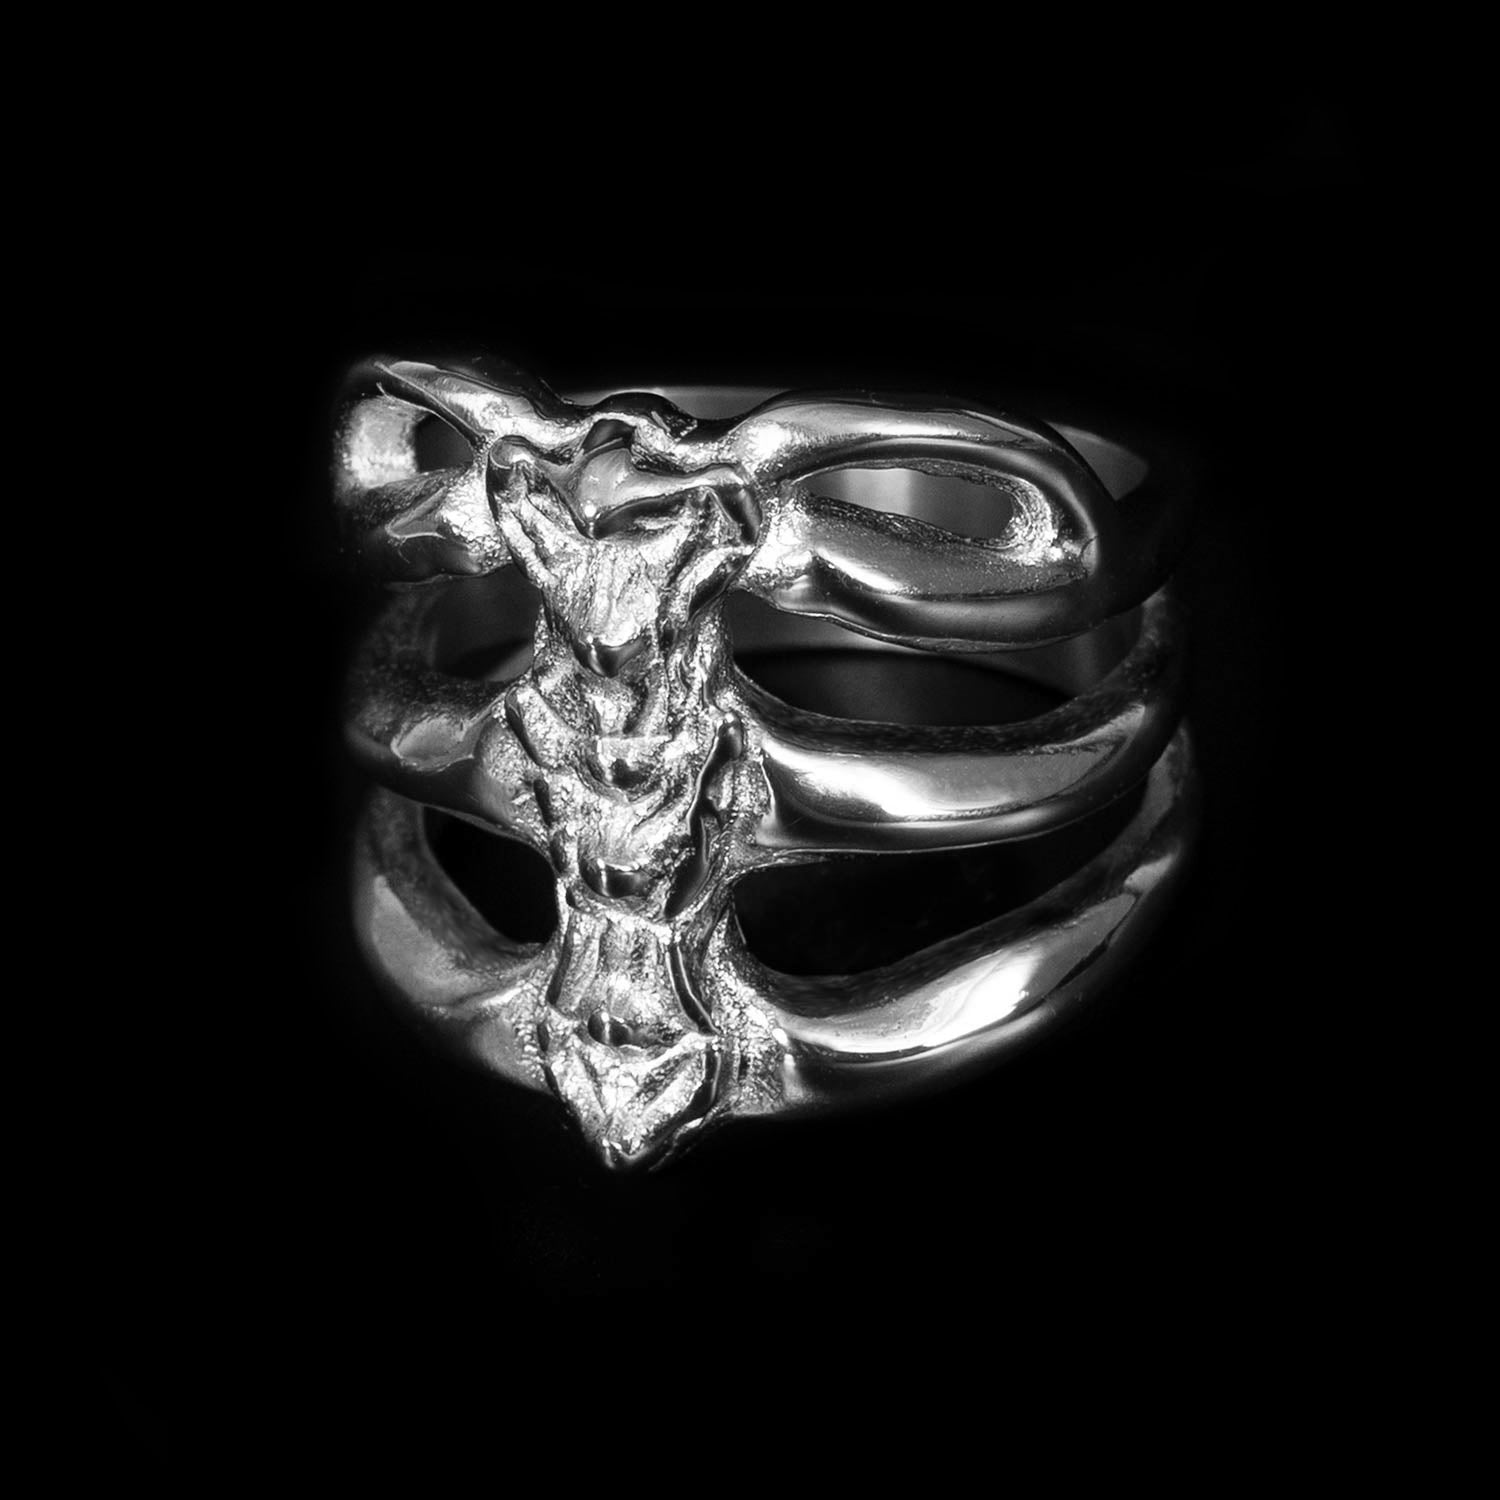 Personal Fears Ribcage Ring in stainless steel